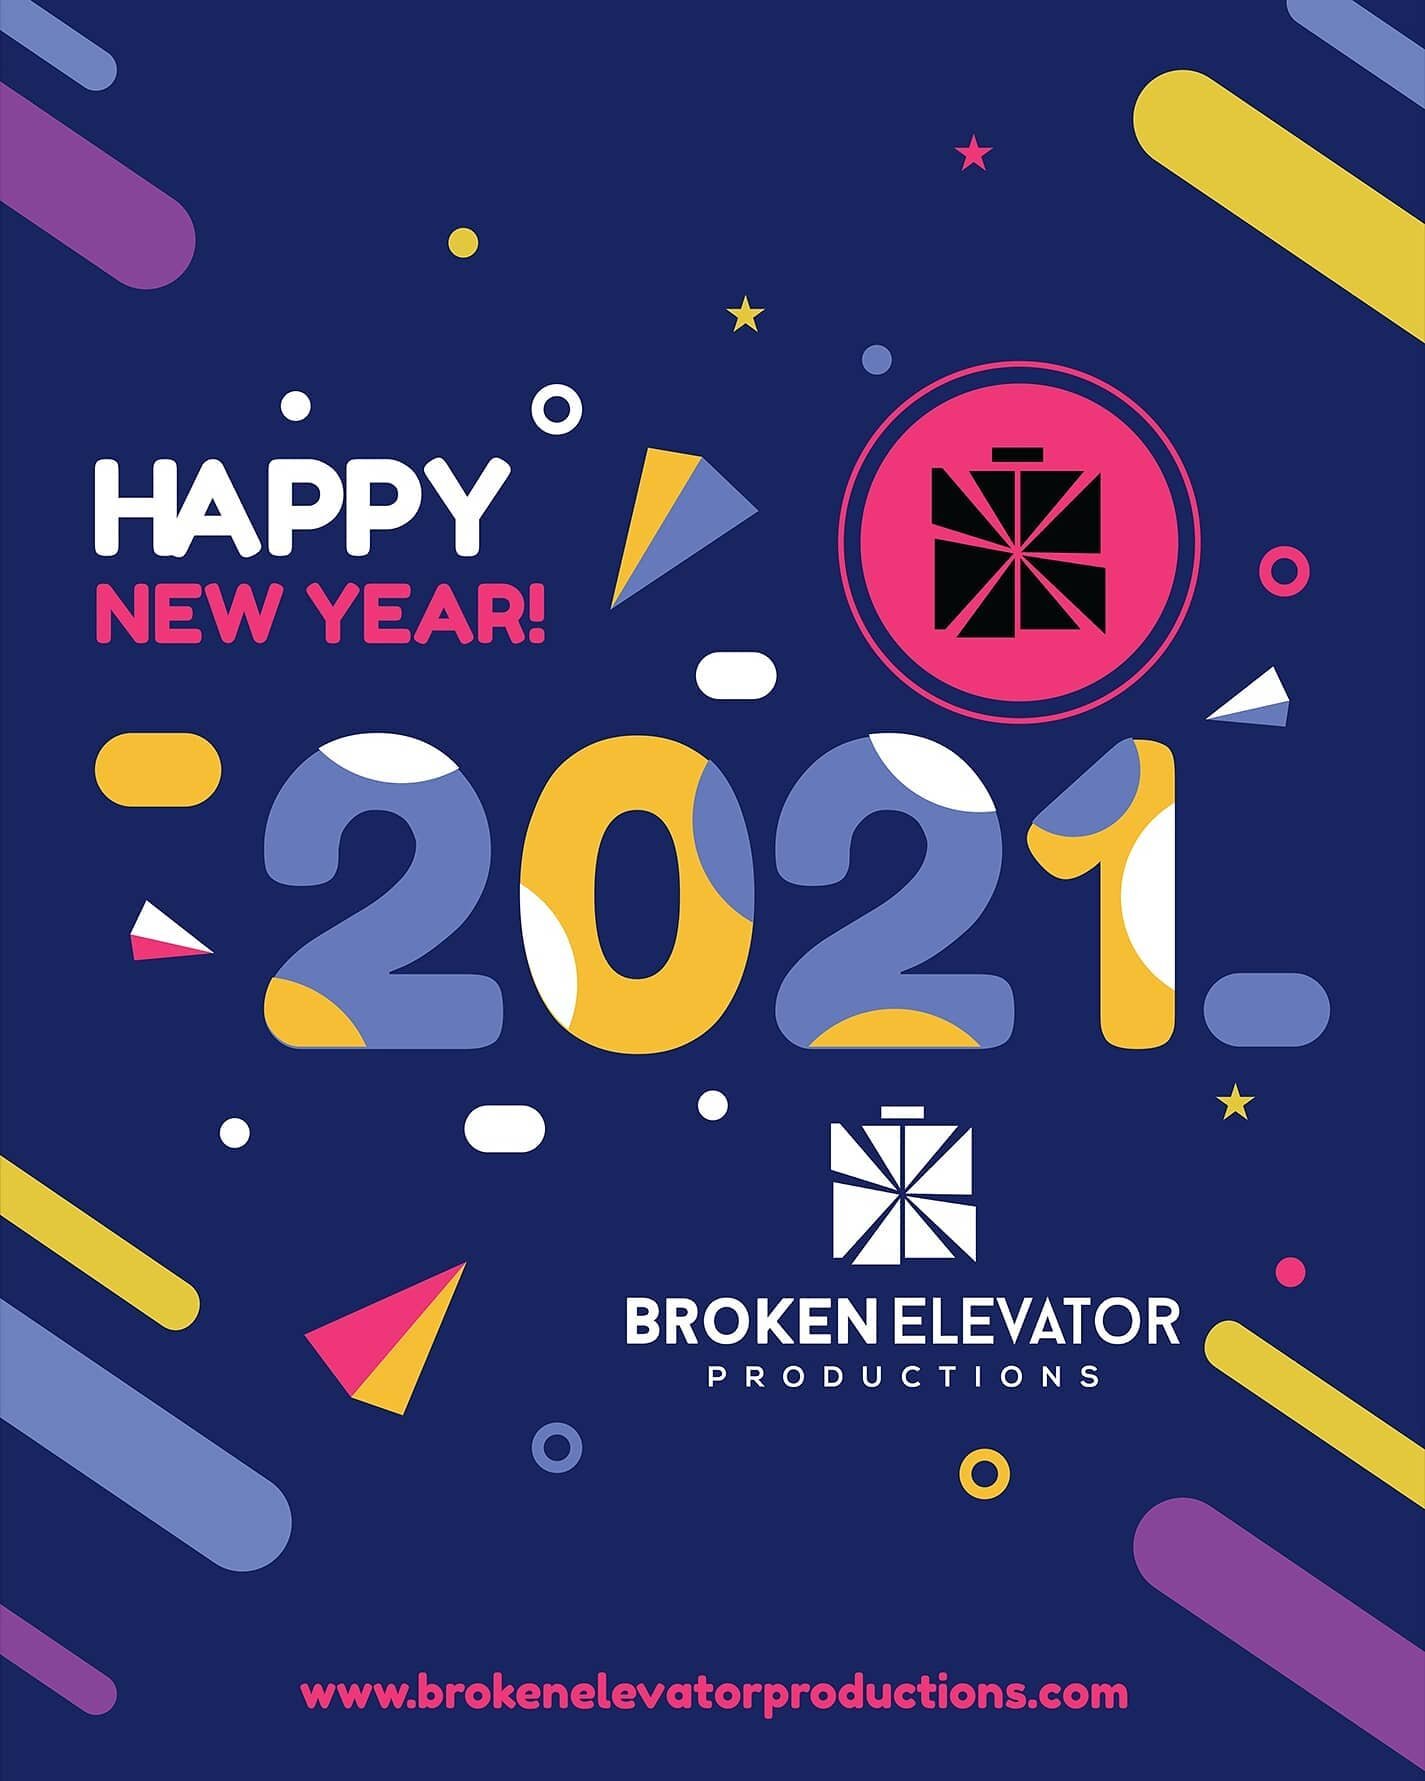 Happy New Years! 🎉🥂🍾 

Thank you for all the support we received in 2020! This year was rough but here is to new beginnings!

Wishing all the best to you and your families as we head into 2021! ❤ 

Sincerely,
The Broken Elevator Productions Team
&